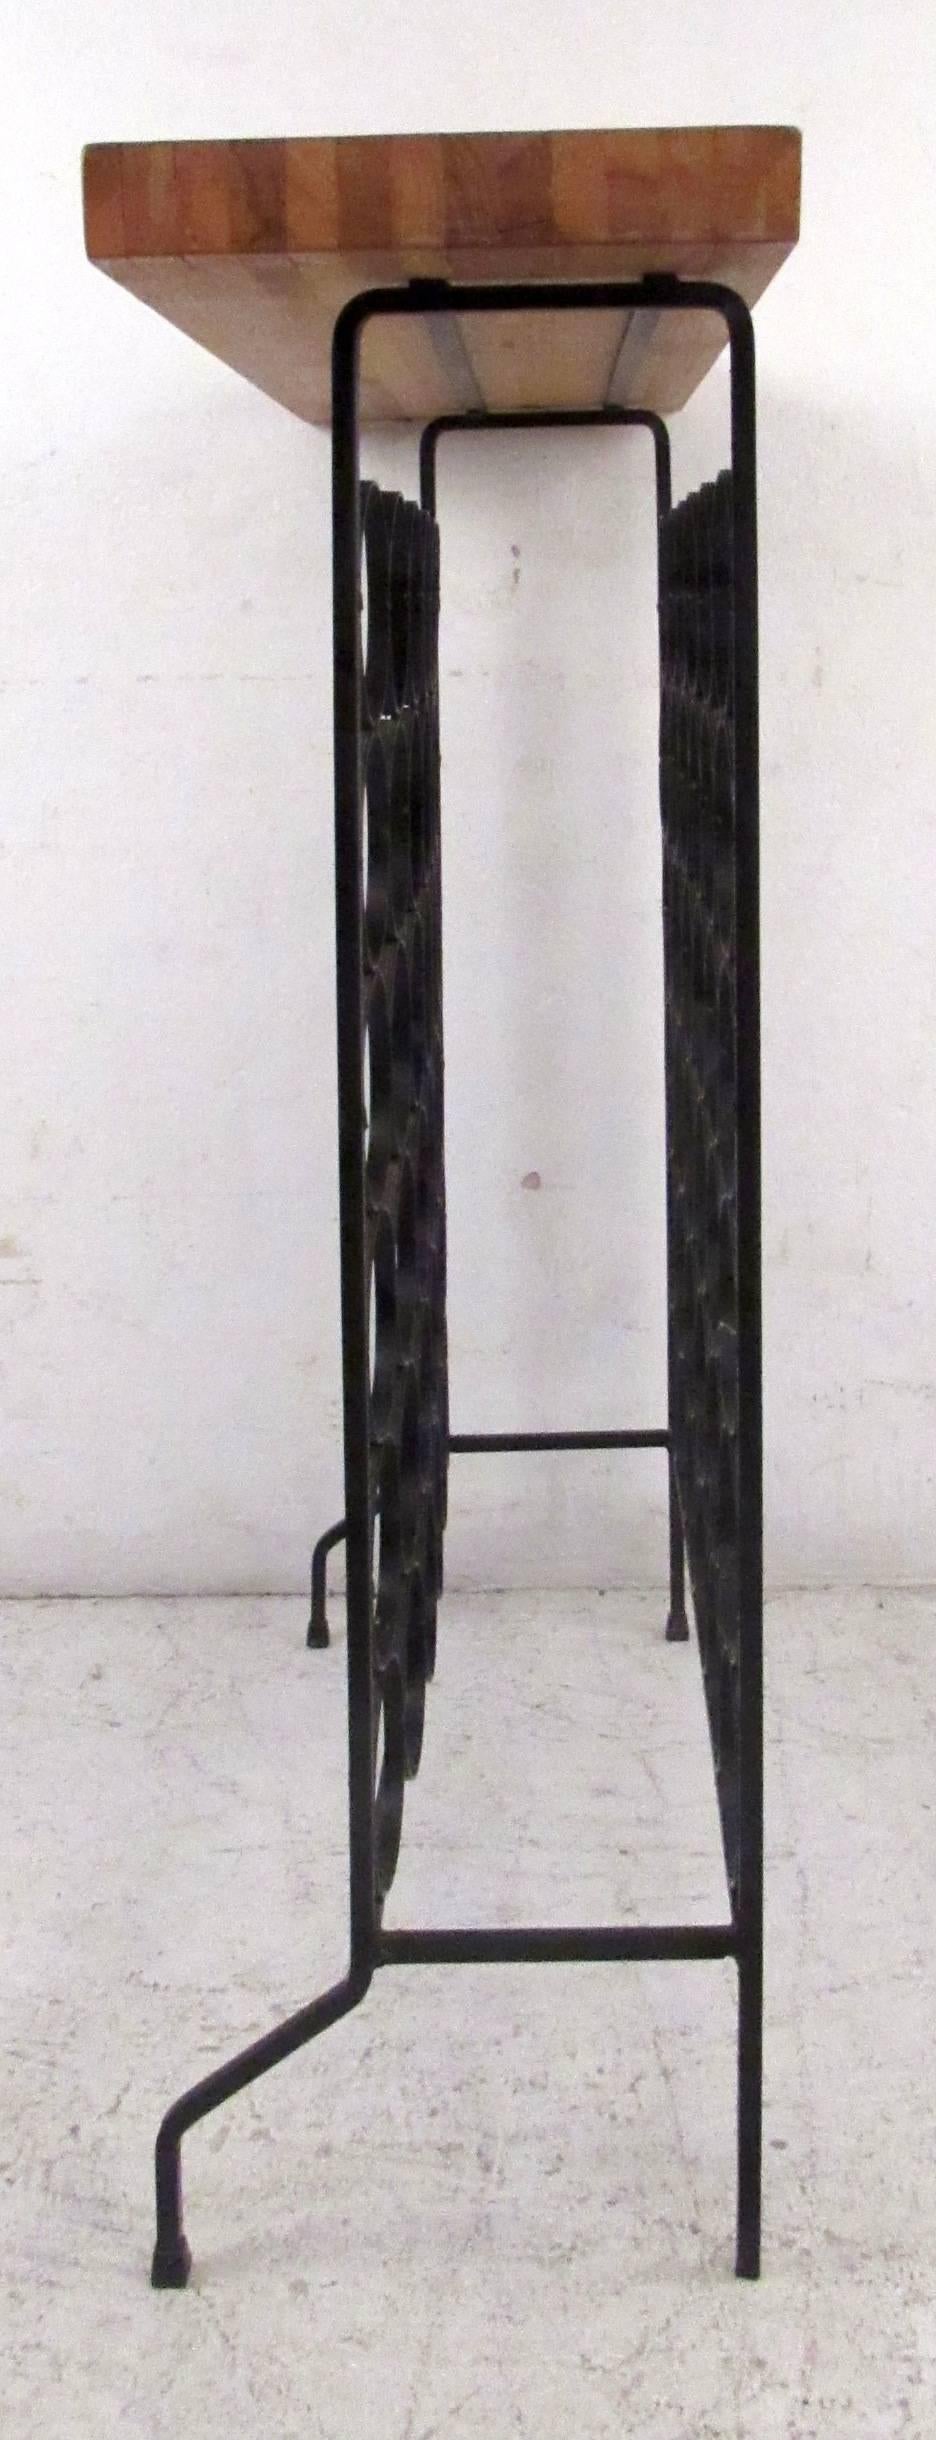 Vintage-modern wine rack featuring sculpted iron base with butcher block top.

Please confirm item location NY or NJ with dealer.